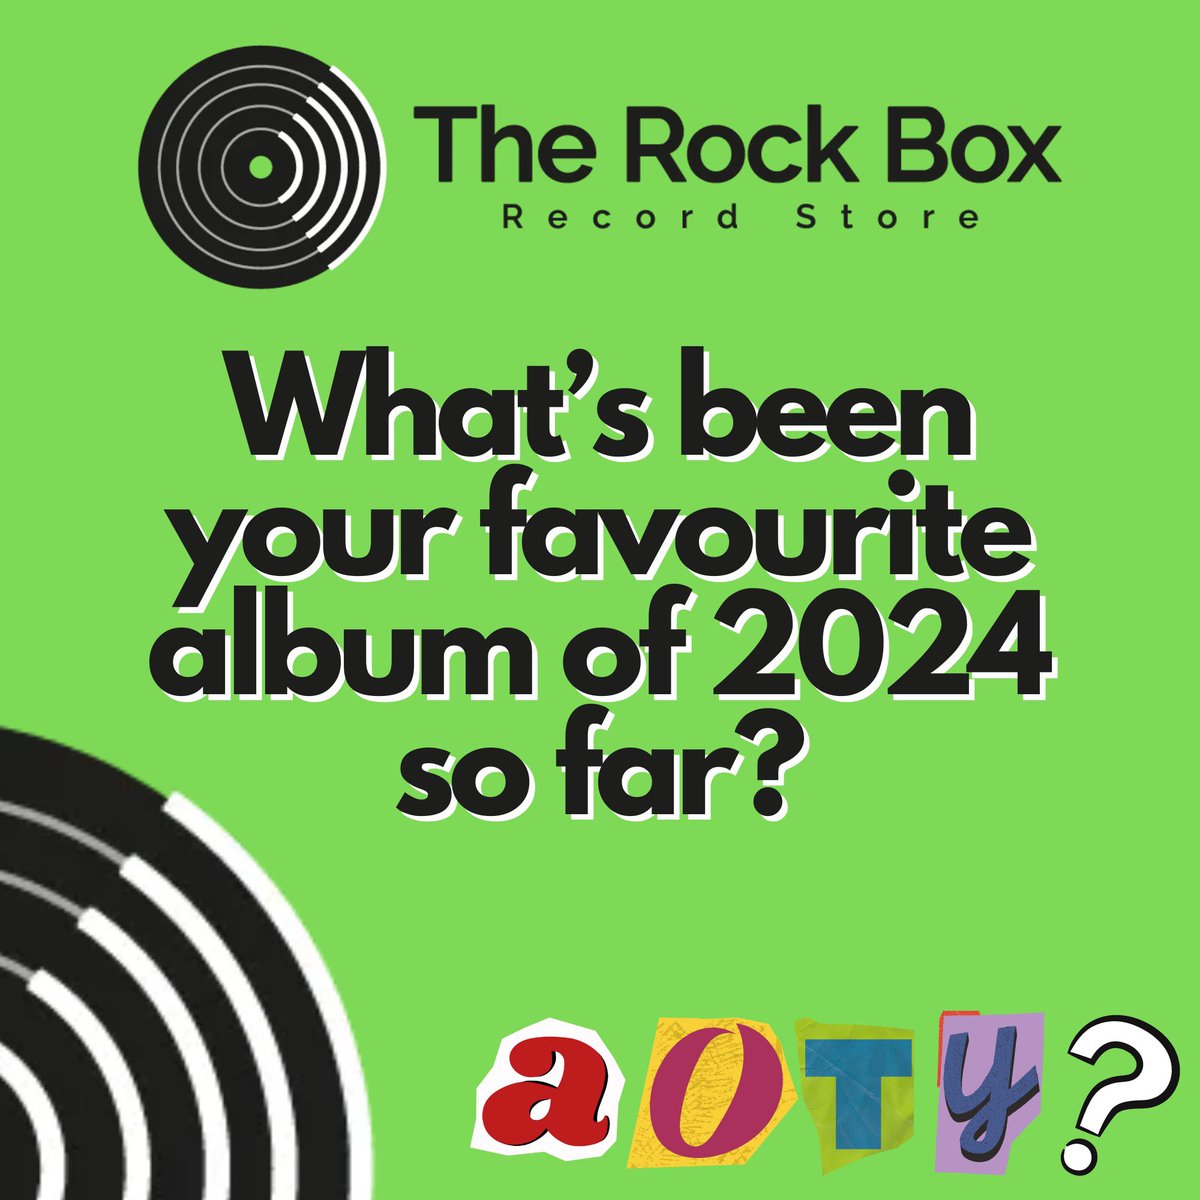 What’s been your favourite album of 2024 so far? Let us know!

#newmusic #aoty #albumoftheyear #recordstore #recordshop